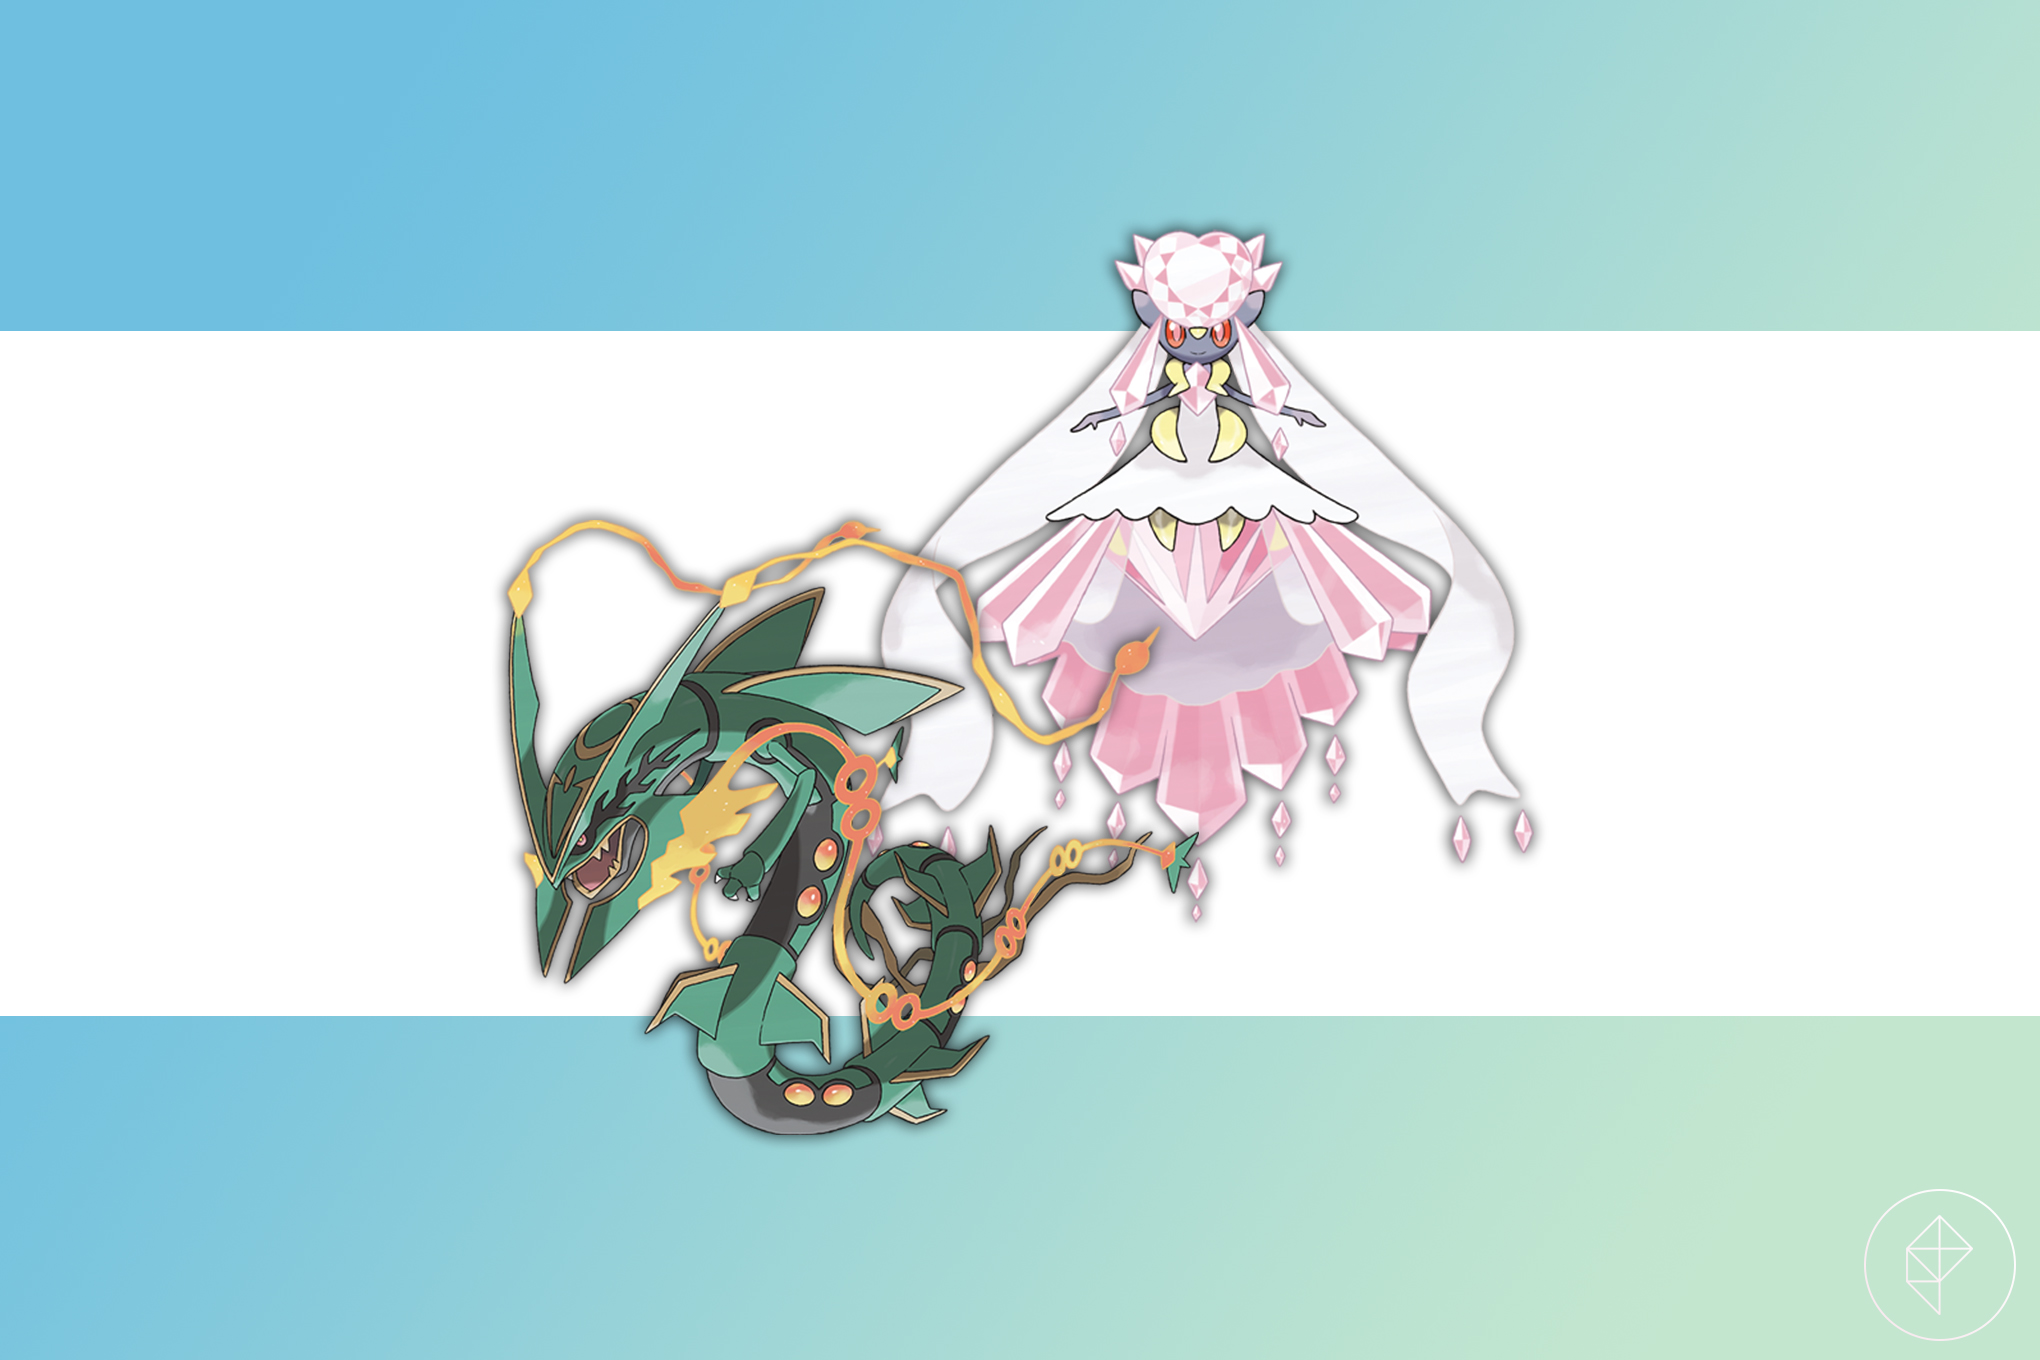 Mega Rayquaza and Diancie on a green and blue gradient background